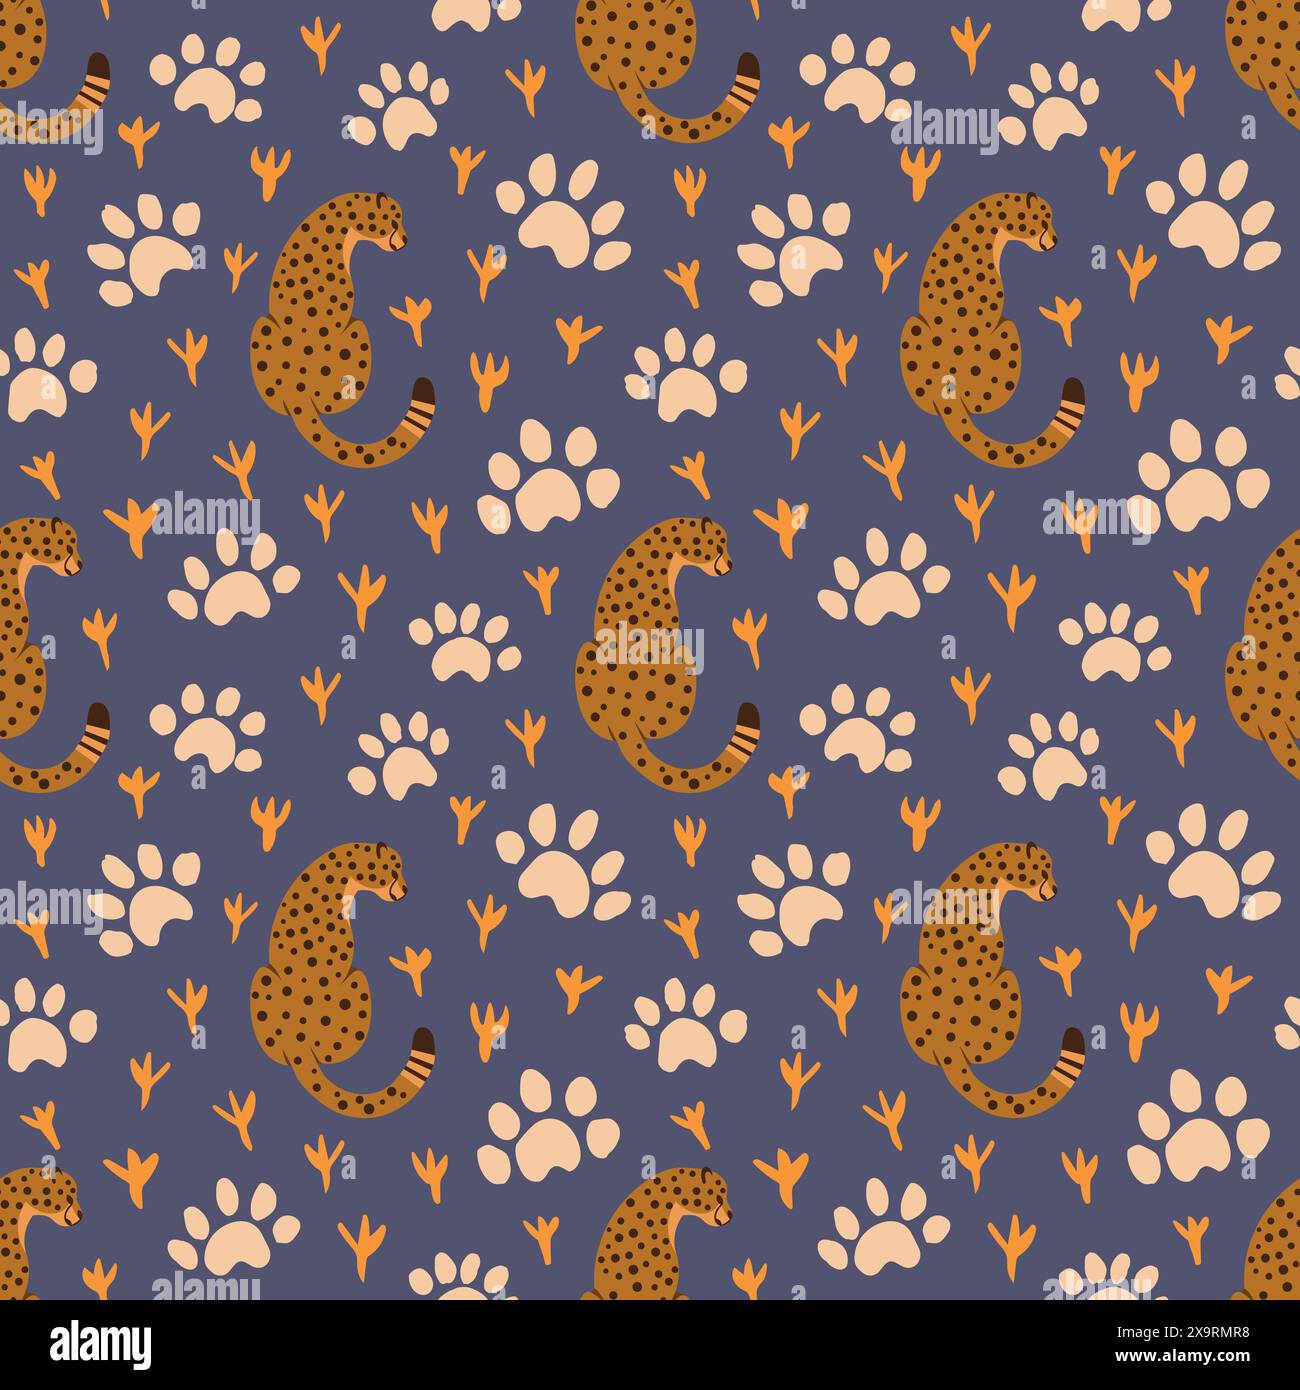 Graceful cheetahs vector seamless pattern and animal tracks for children's clothing, zoo animal tropical playroom decor. Stock Vector